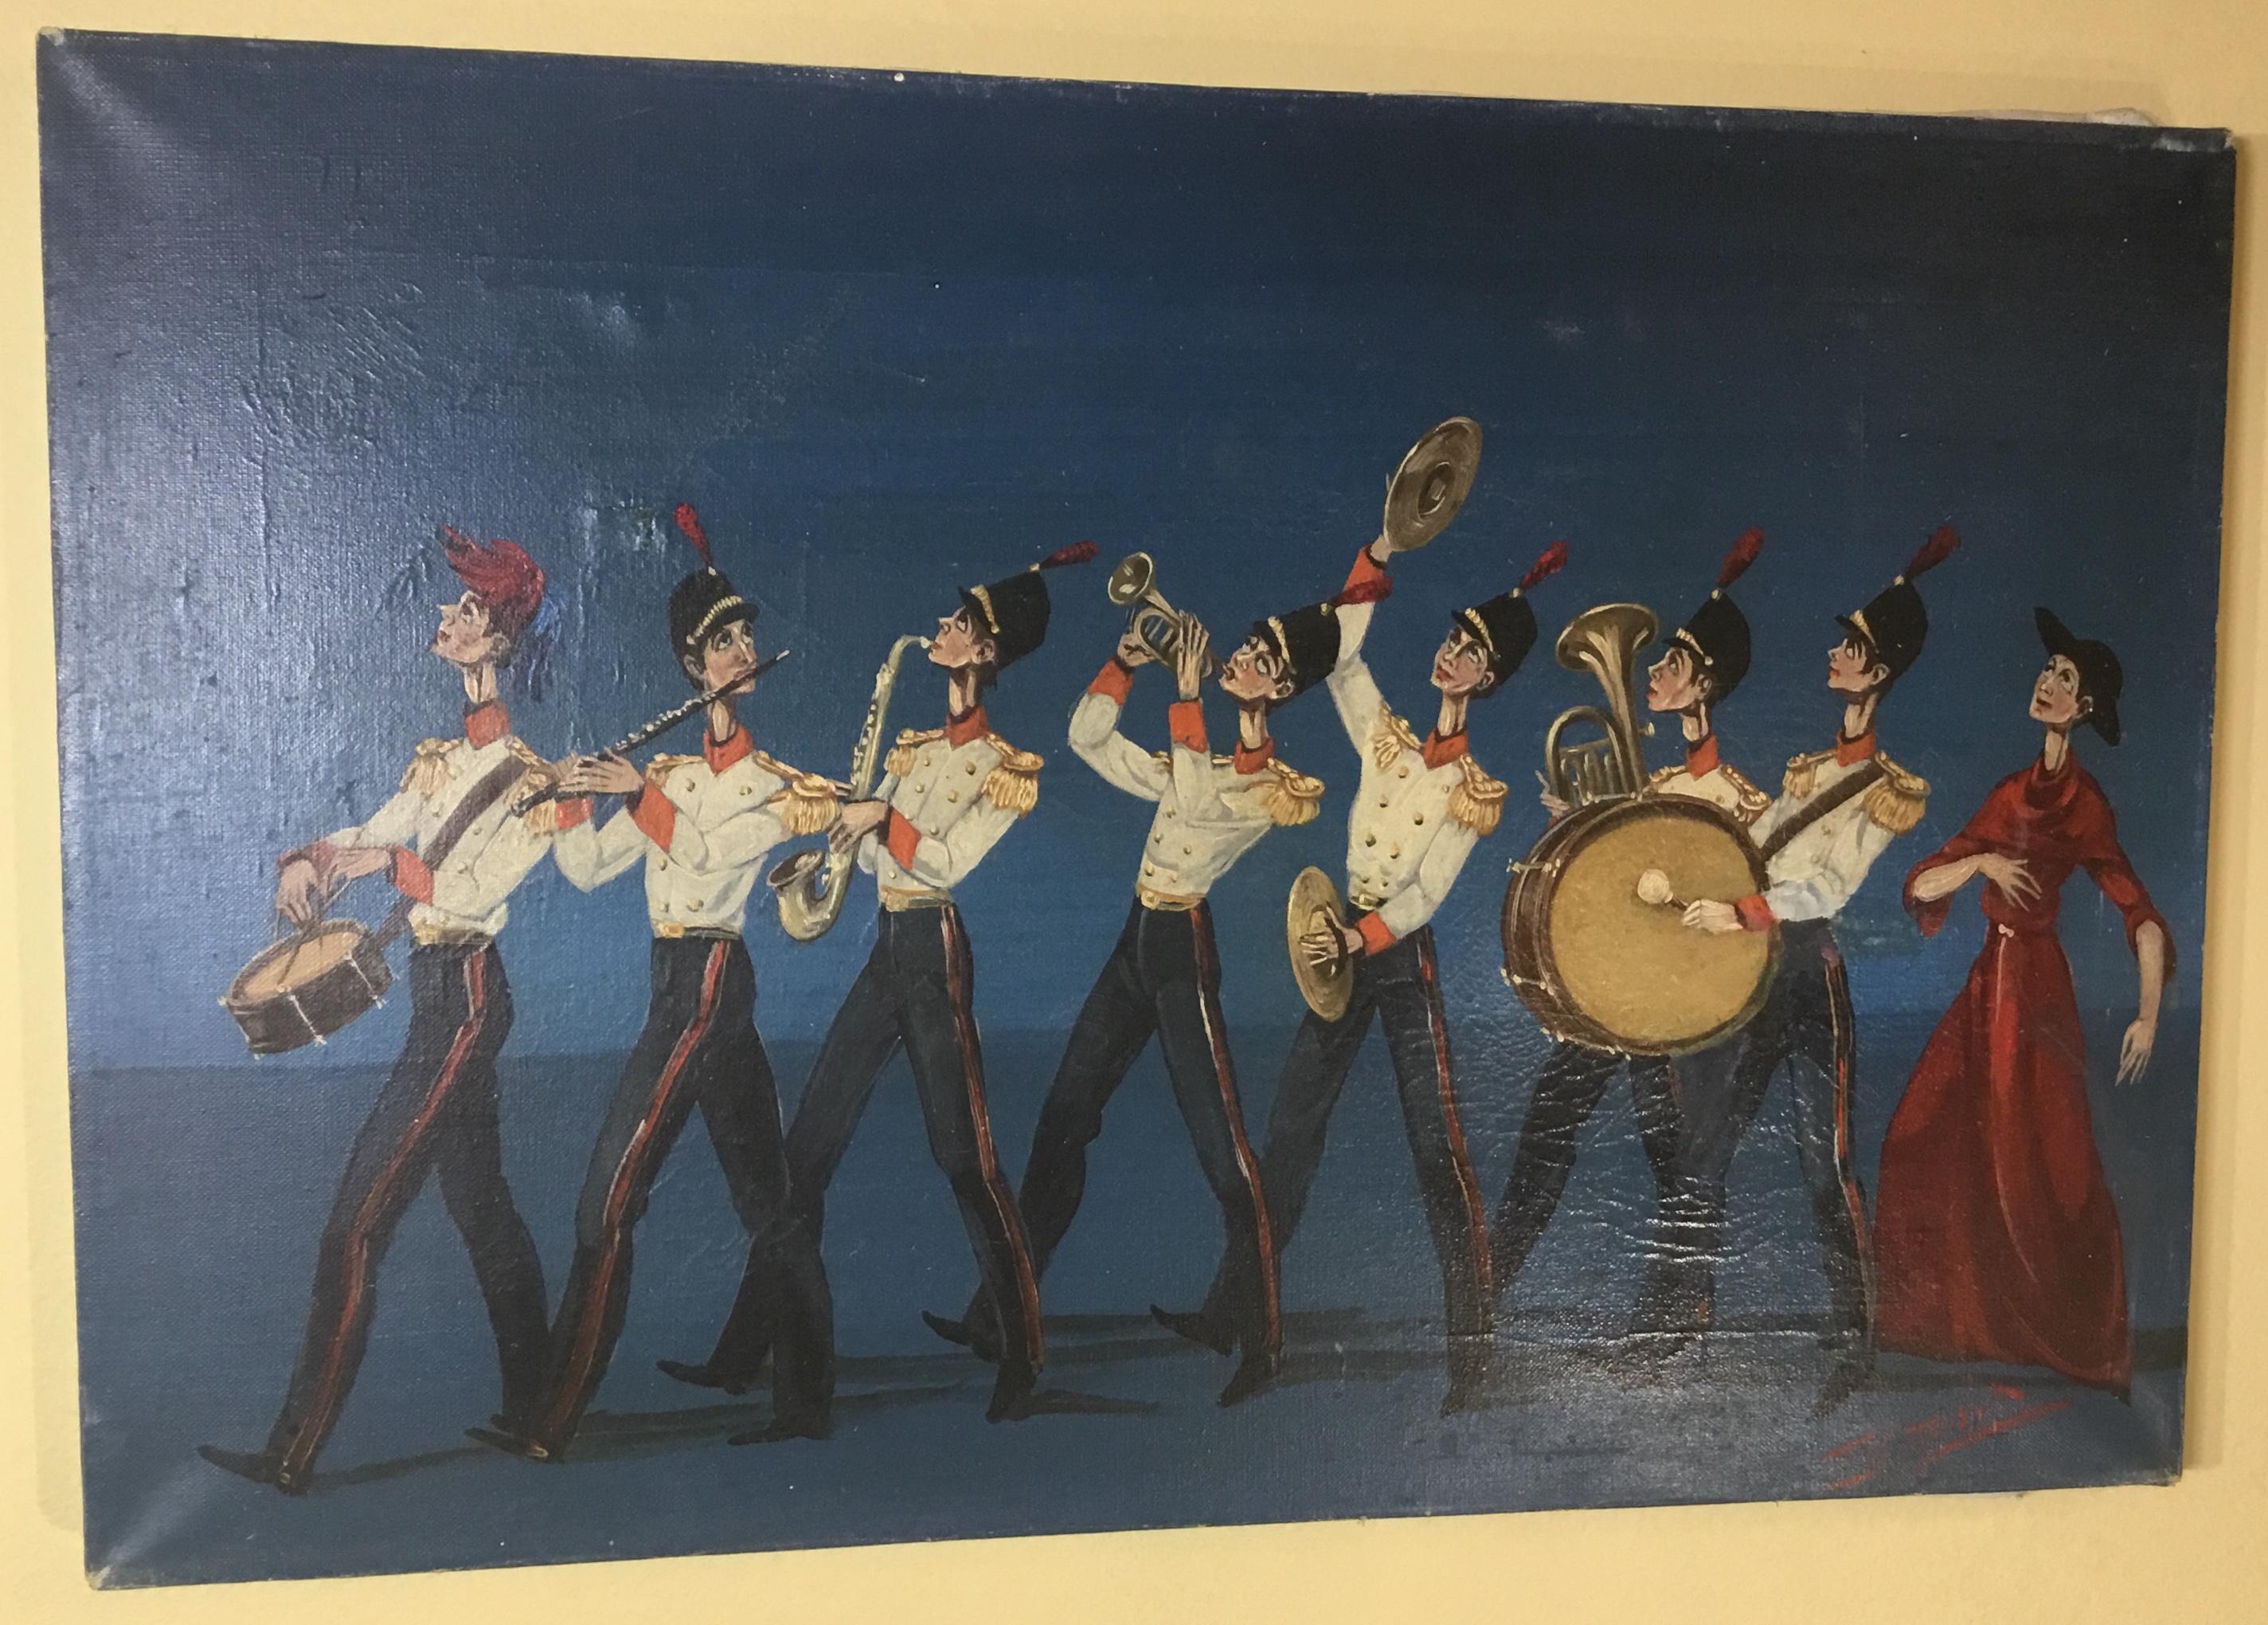 Very intriguing oil painting on canvas by D’ellia of marching band with friars, signed lower right,
School of Canevari painting.